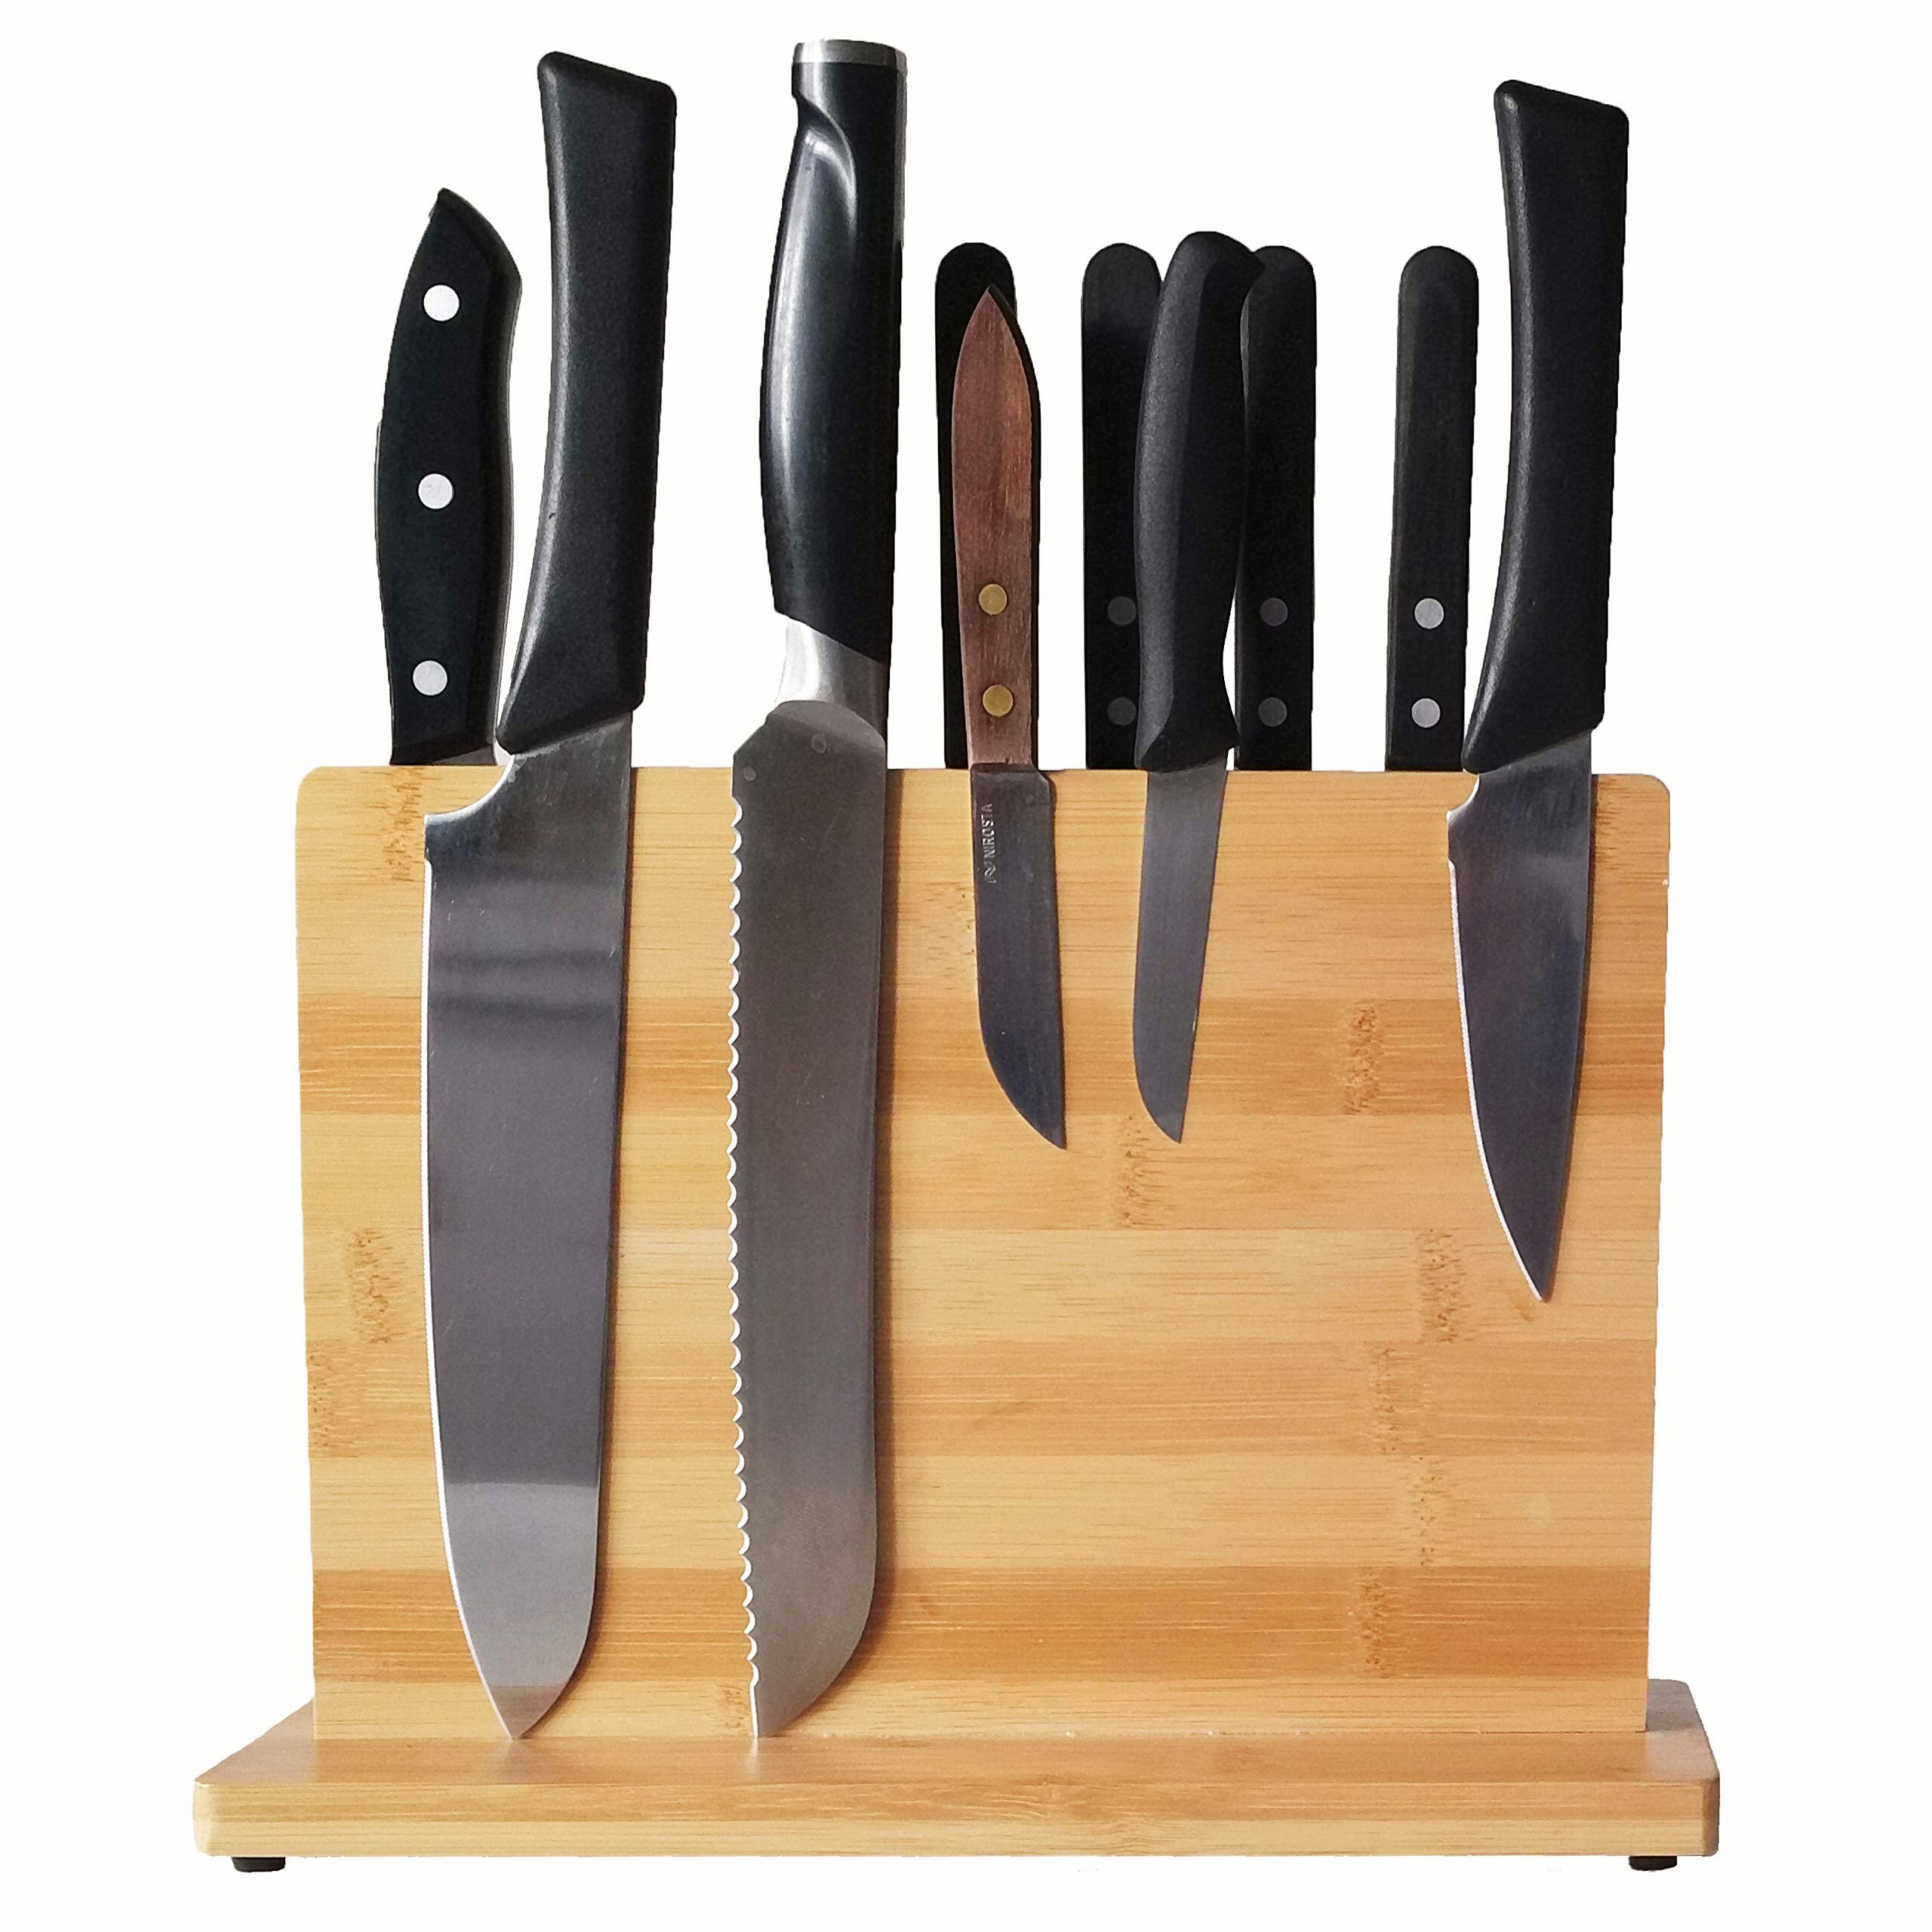 Hou Double Sided Bamboo Magnetic Knife Block Fits All Knives And Other Utensils Up To Displays Knives Keeps Knives Sharp And Clean Easy Access To Knives While Cooking Wayfair